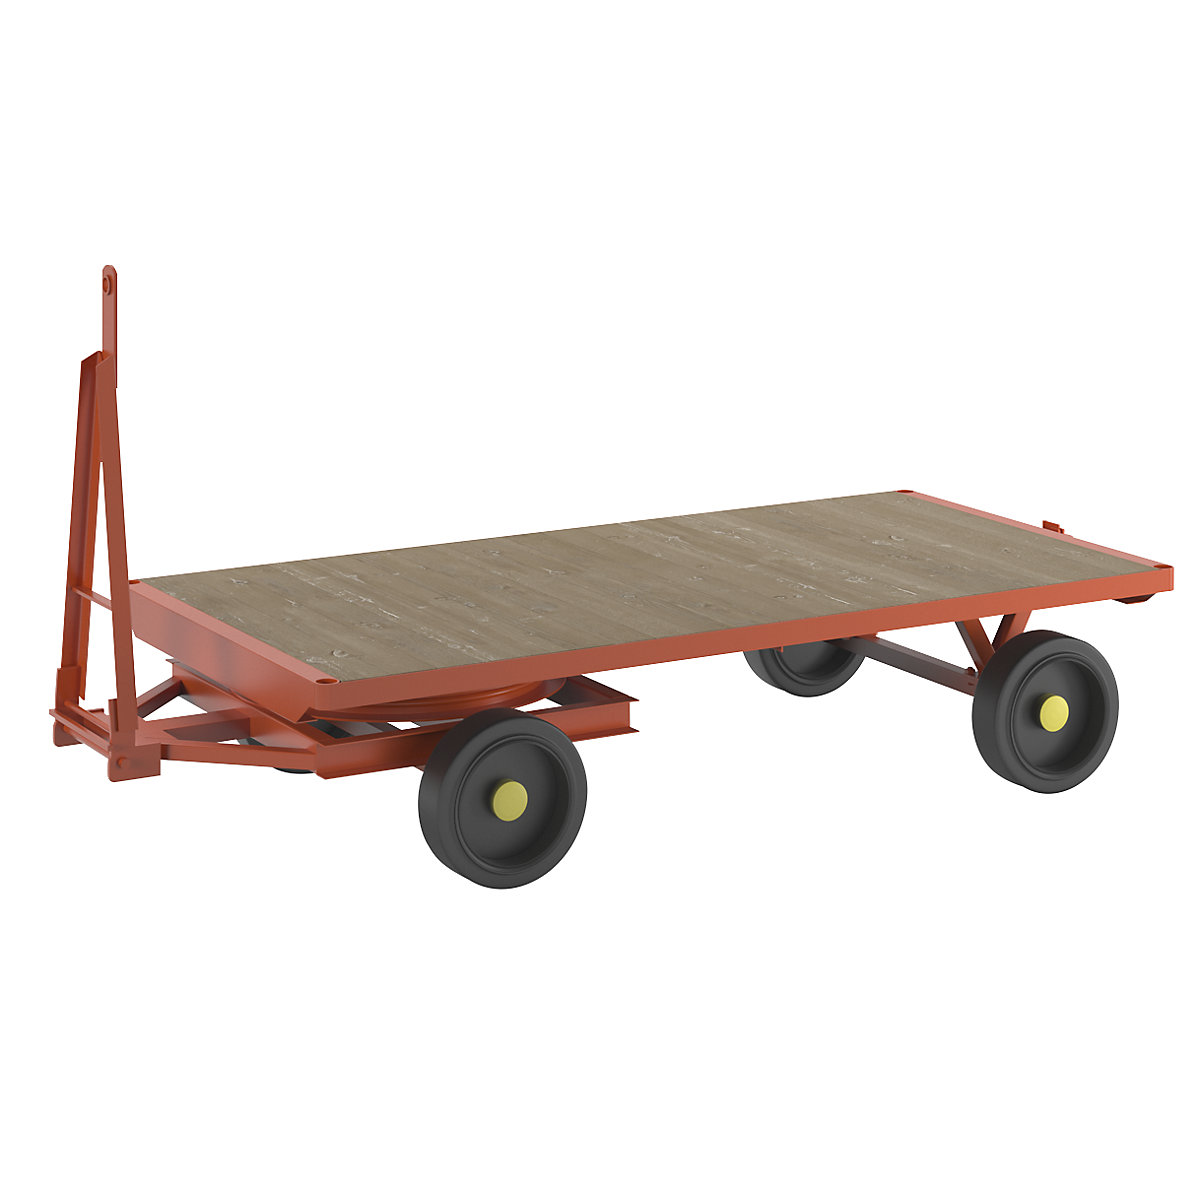 Trailer, 2-wheel turntable steering, max. load 5 t, platform 2.5 x 1.25 m, solid rubber tyres-3